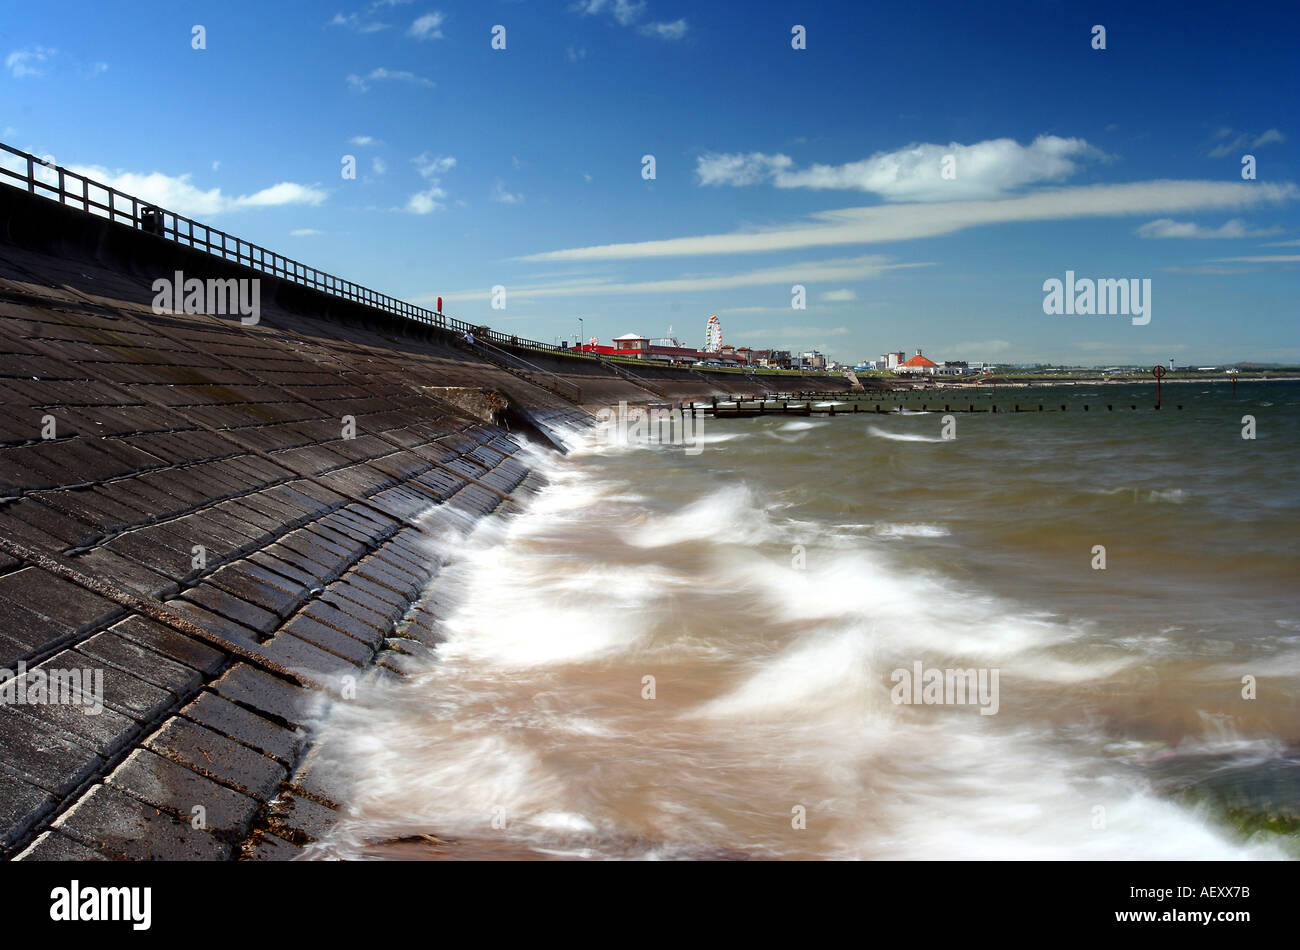 Landscape format image of Aberdeen Beach and promenade Scotland against a blue sky and crashing waves in foreground Stock Photo